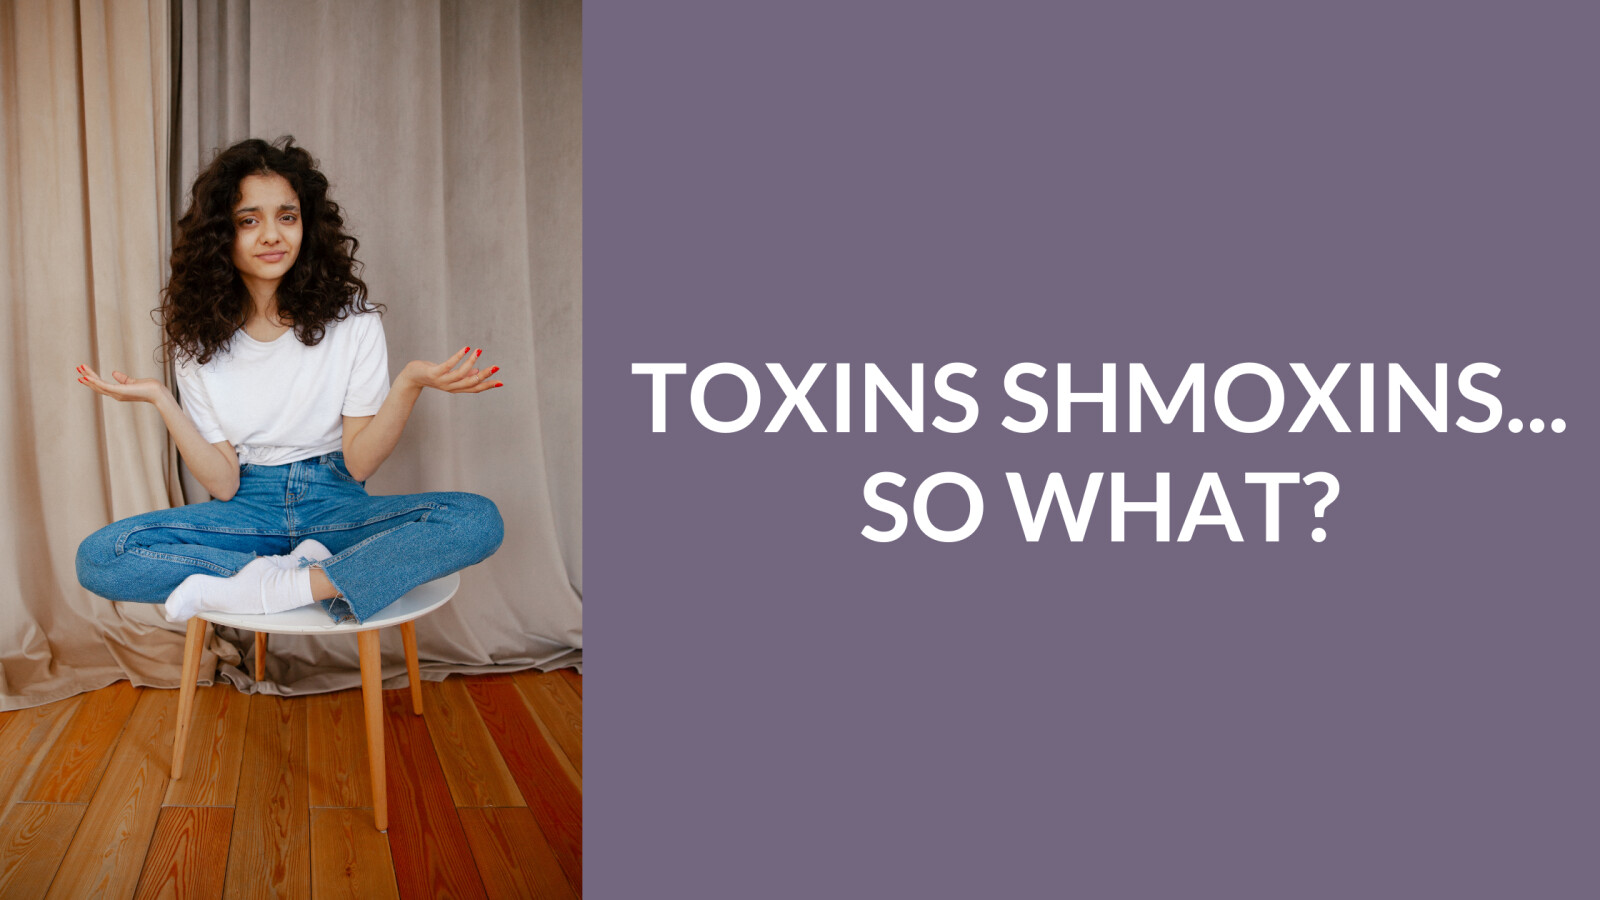 So What's the Big Deal with Toxins Anyways....? We're Exposed to Them Constantly As It Is